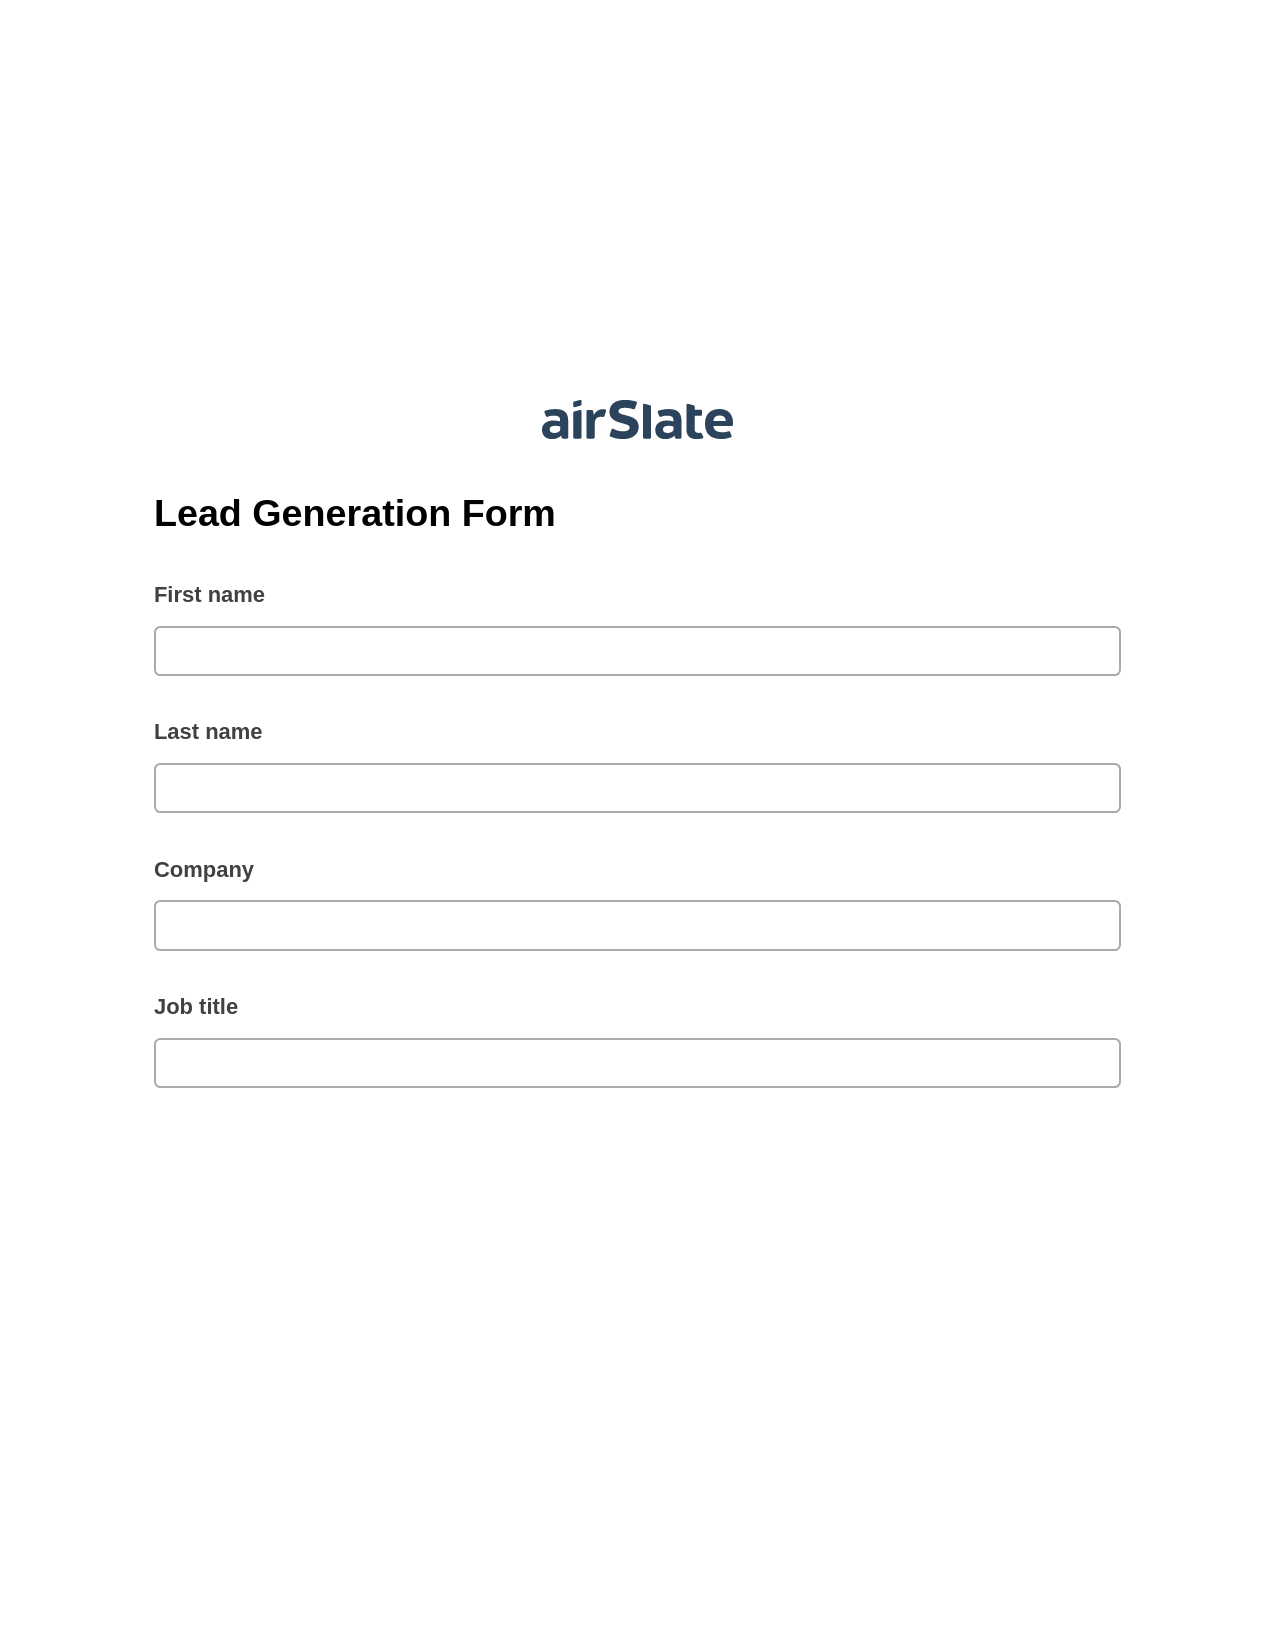 Lead Generation Form Pre-fill Dropdowns from Airtable, Create Slate Reminder Bot, Archive to OneDrive Bot